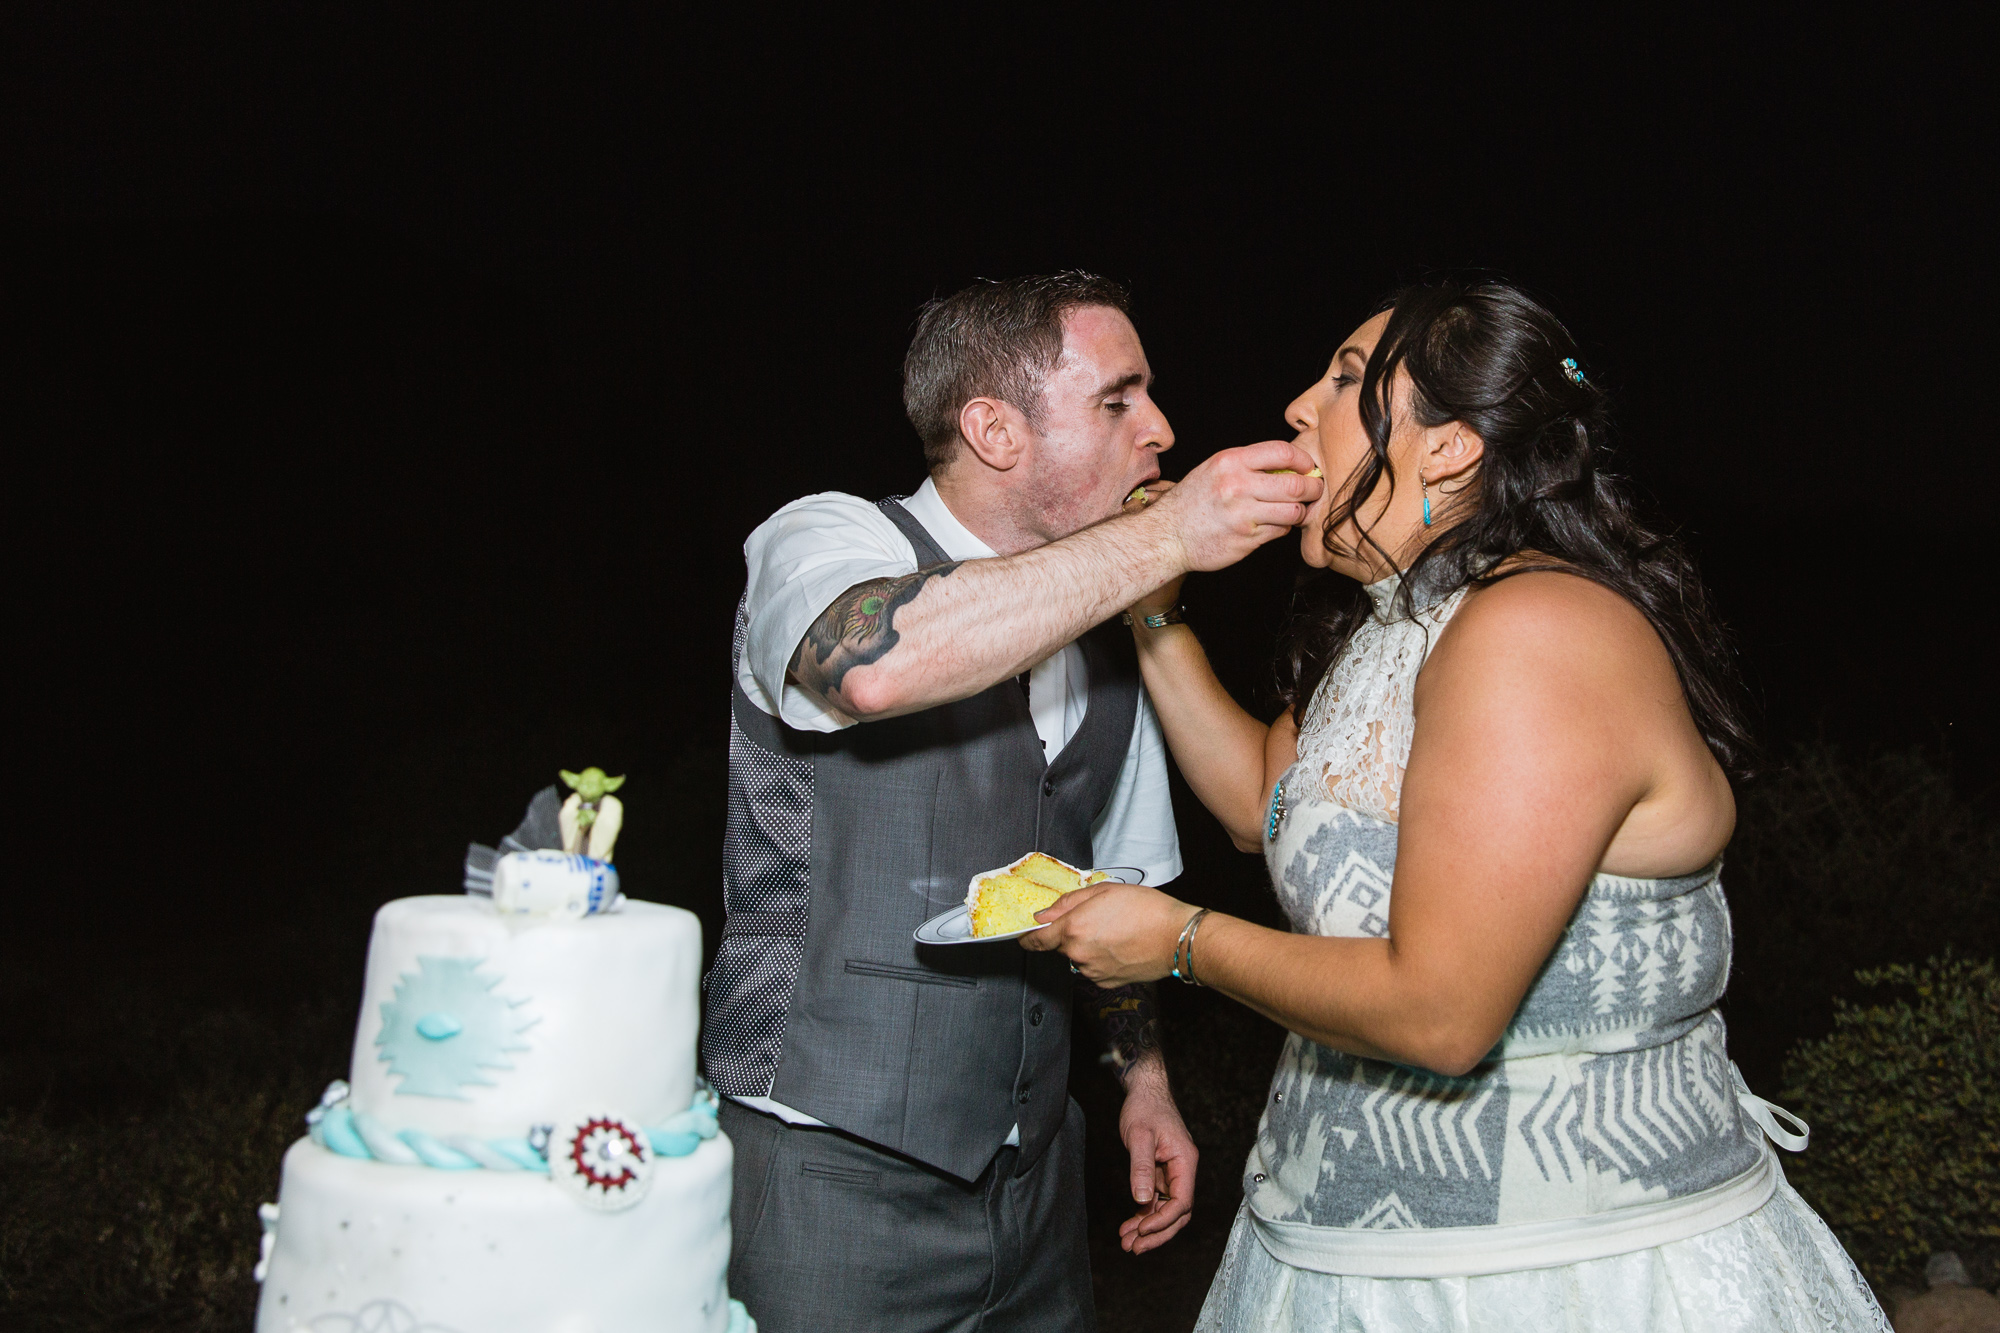 Bride and groom cutting the cake at their wedding reception by PMA Photography.